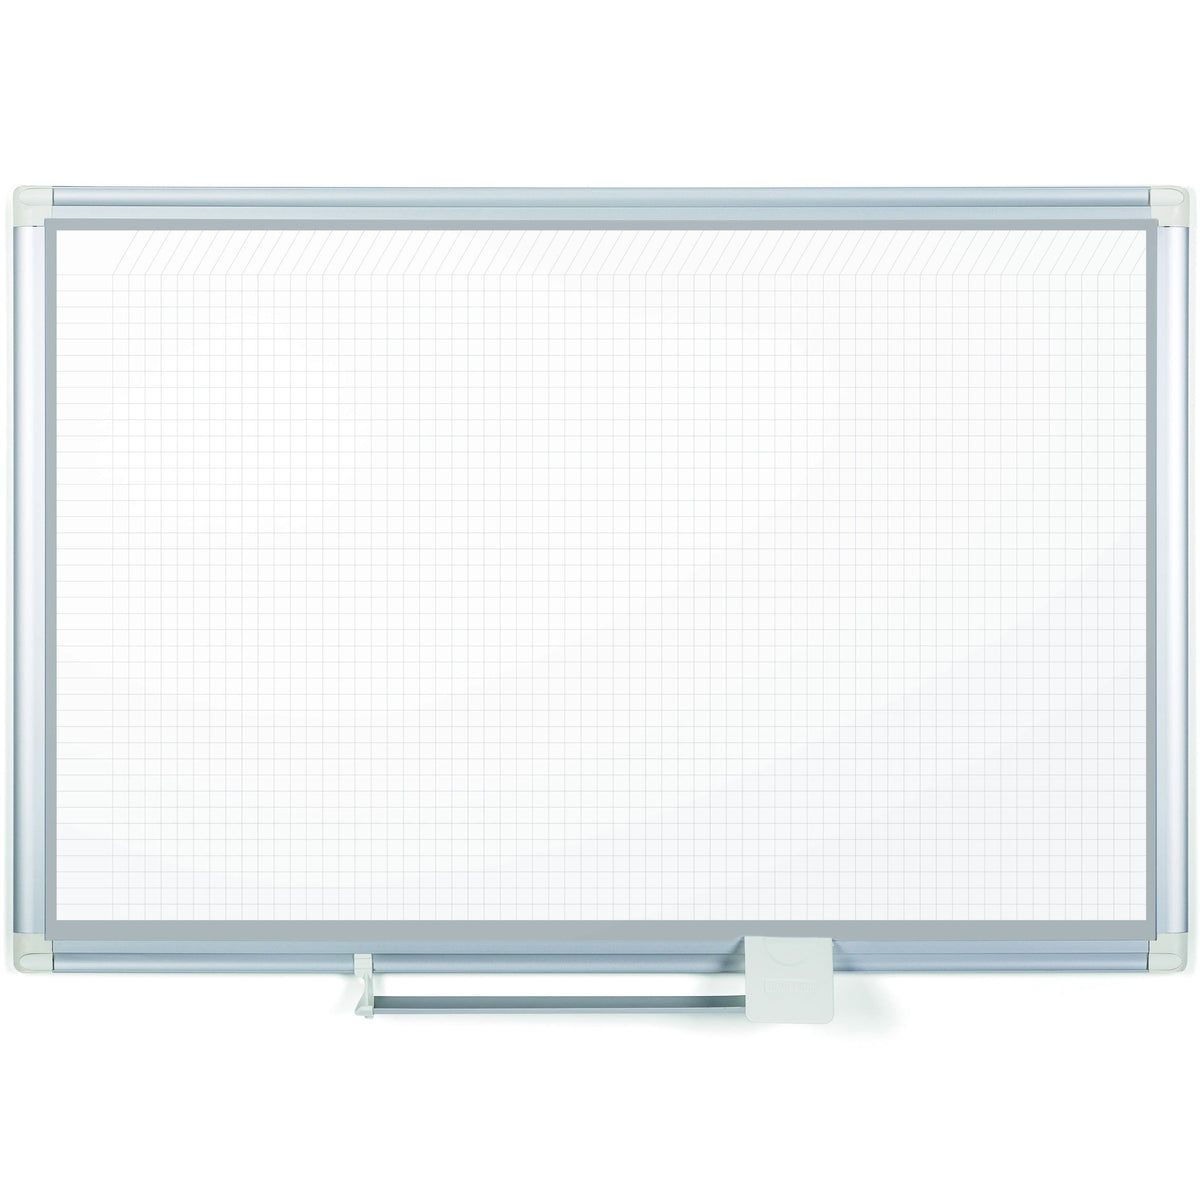 GA27109830A Magentic Dry Erase General Format Planning White Board + Accessory Pack, 1" x 1" Grid, Laquered Steel, 48" x 72", Aluminum Frame by MasterVision